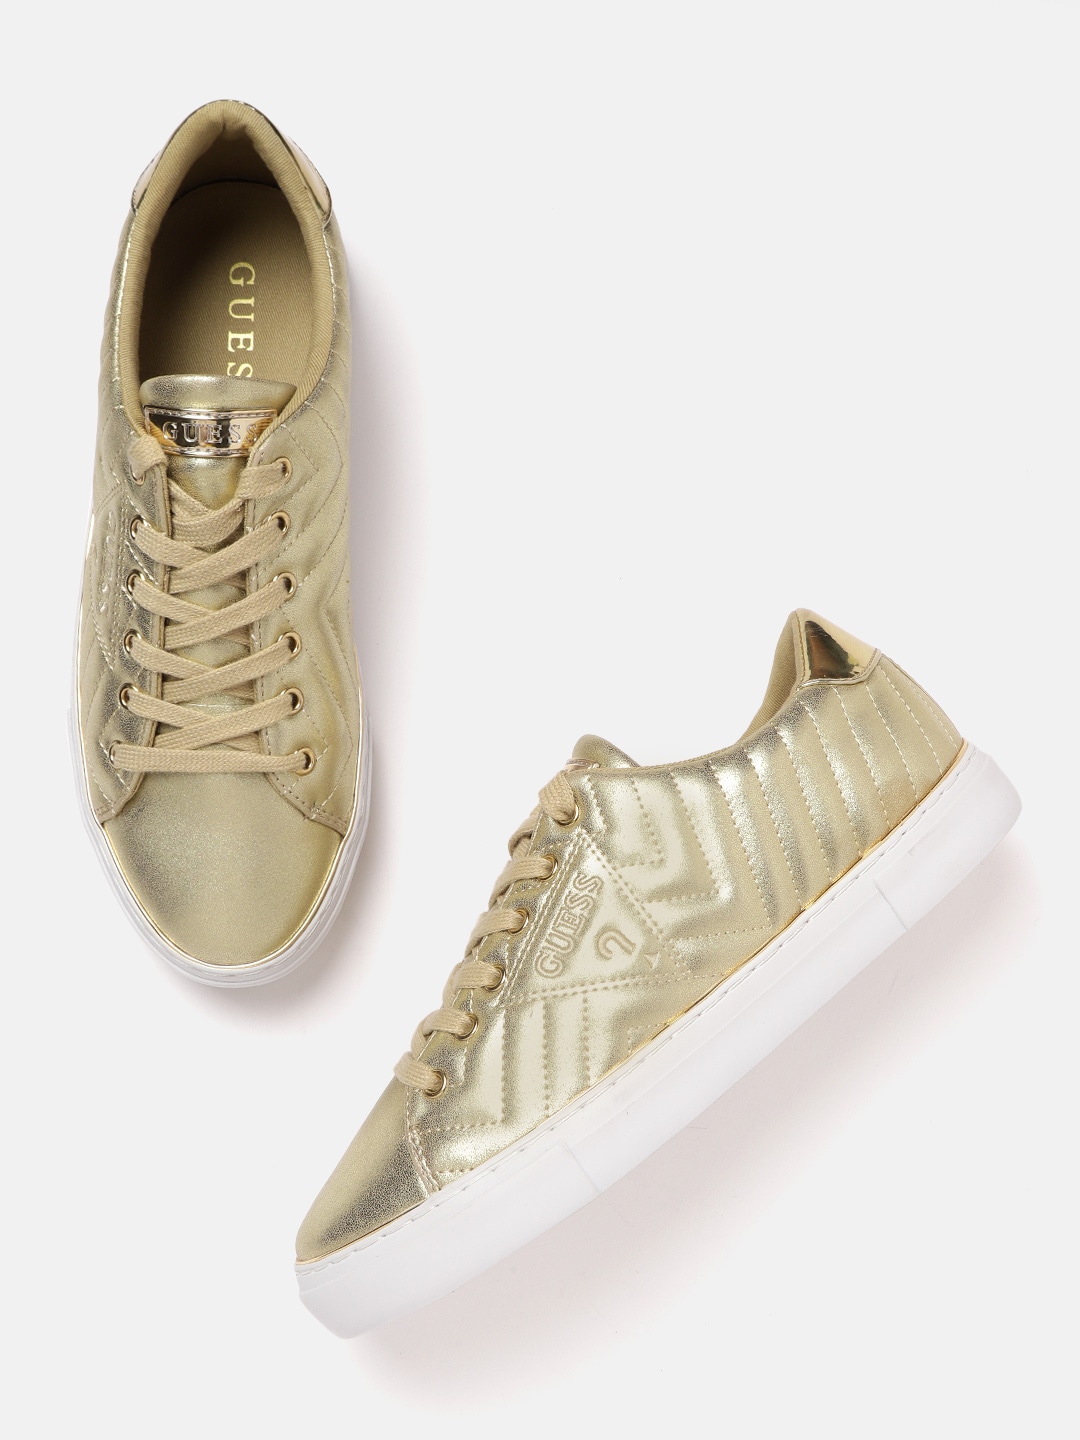 GUESS Women Gold-Toned Woven Design Sneakers Price in India